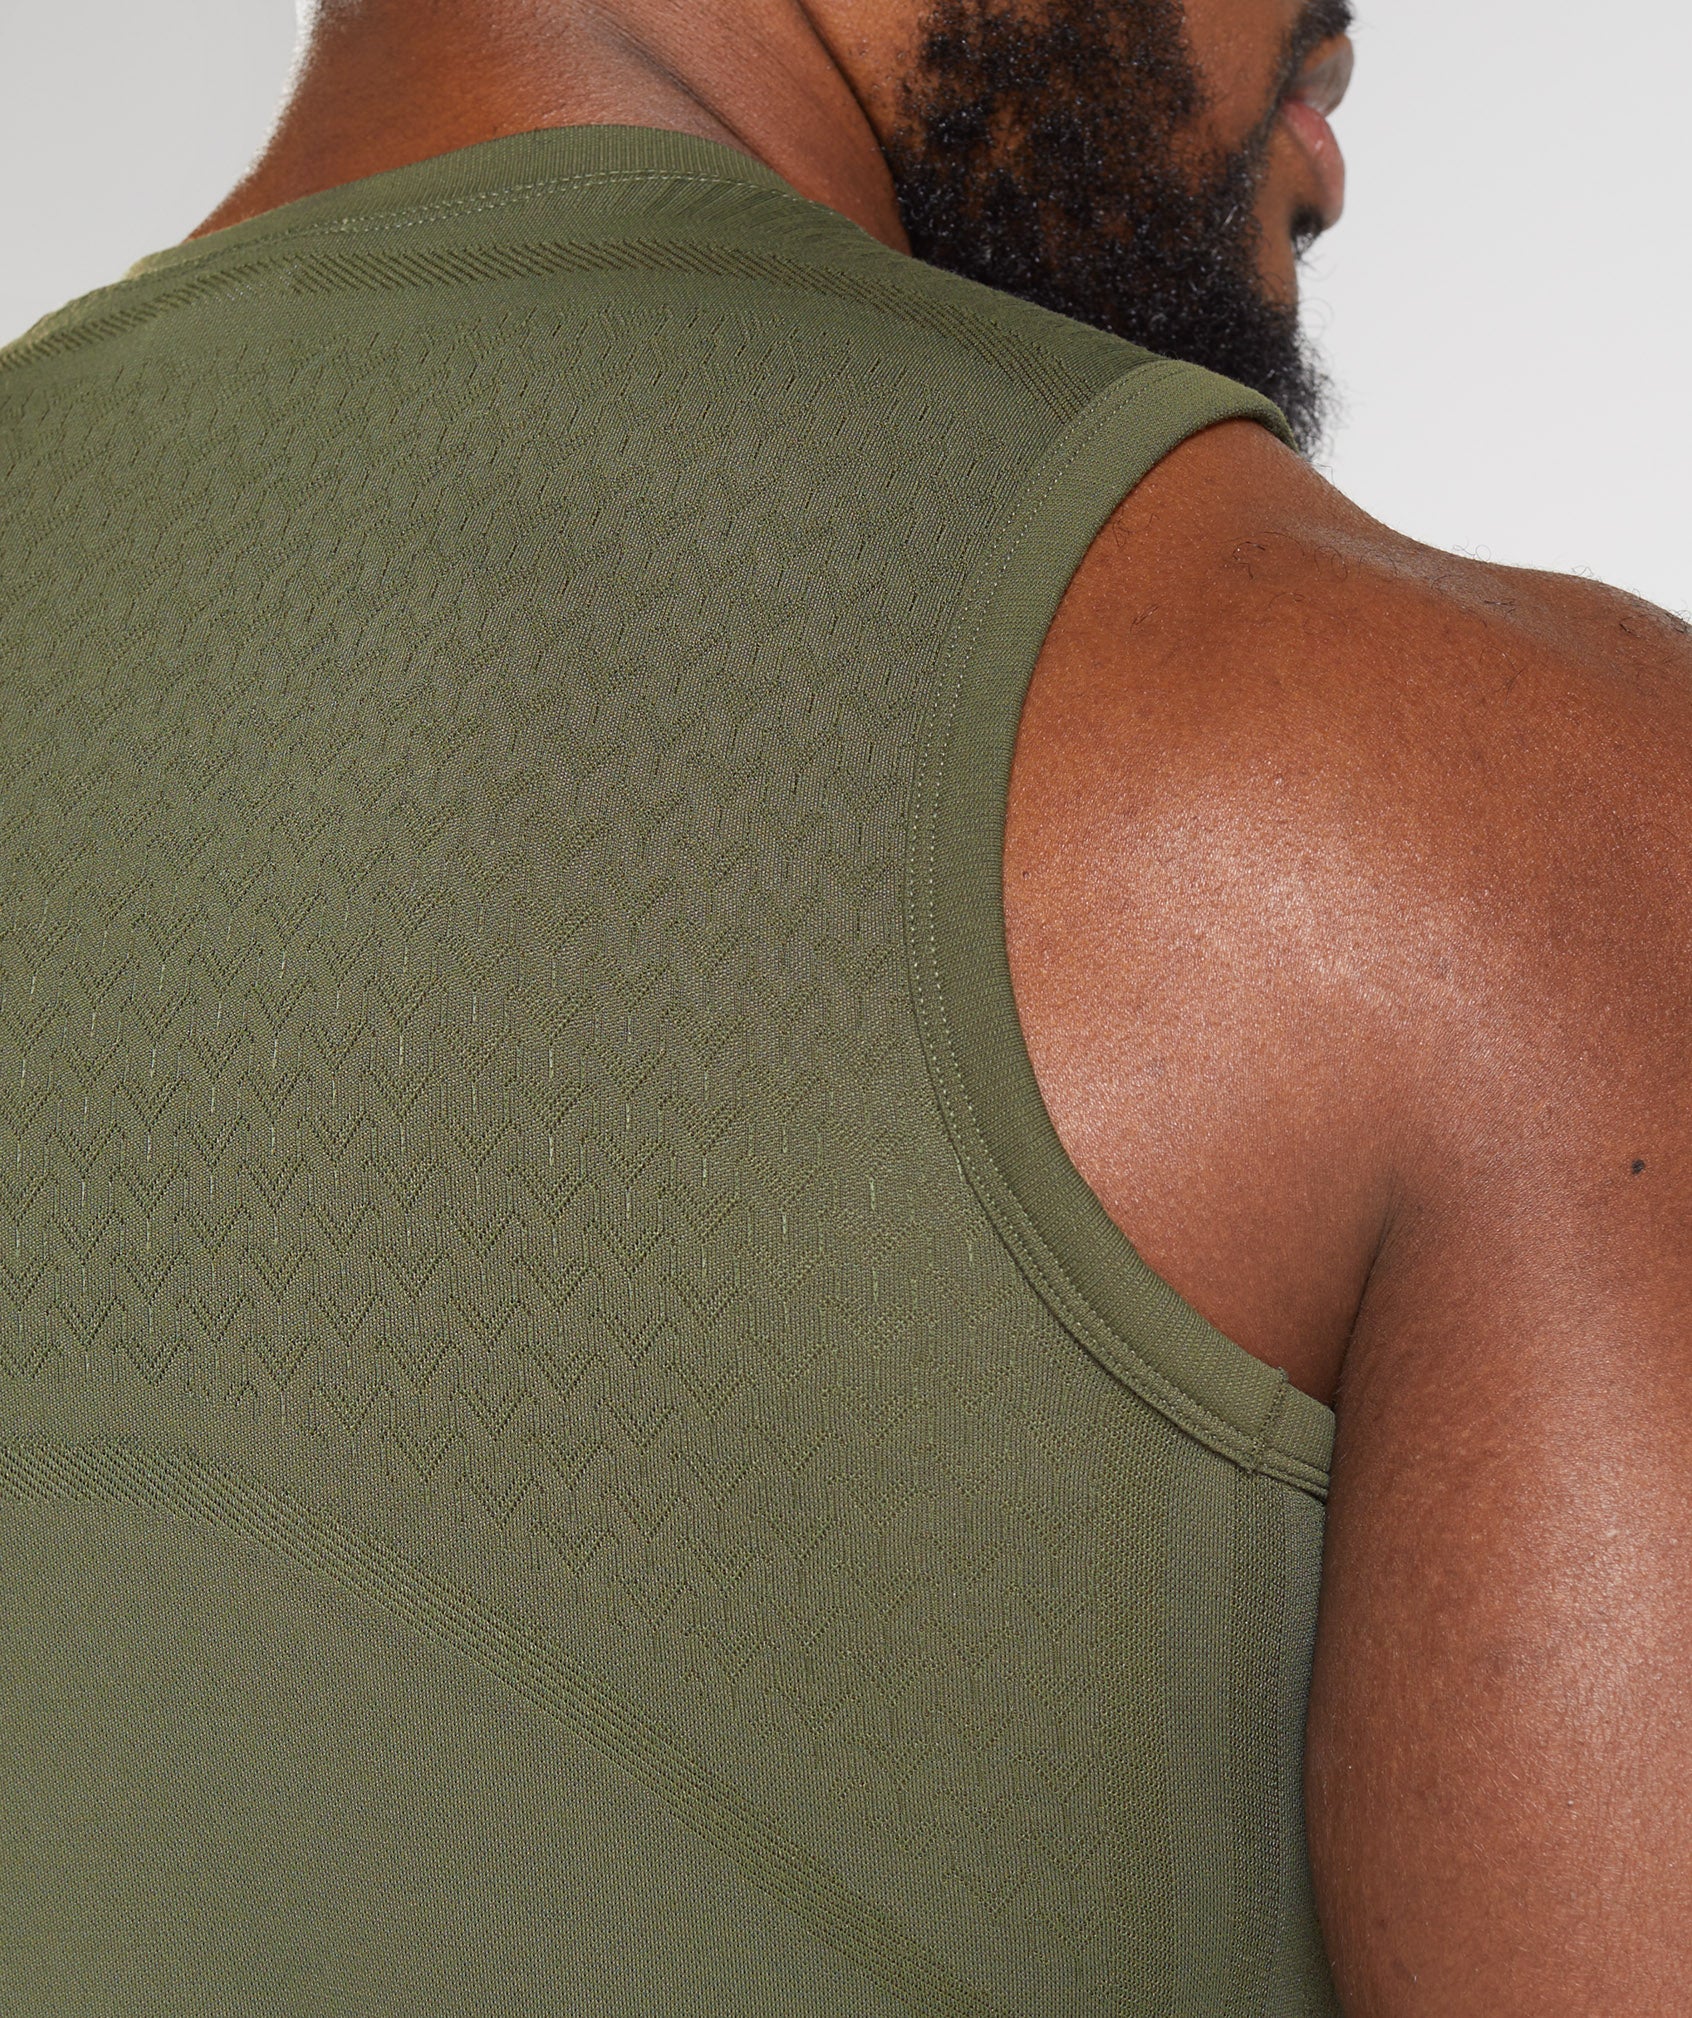 315 Seamless Tank in Core Olive/Marsh Green - view 5